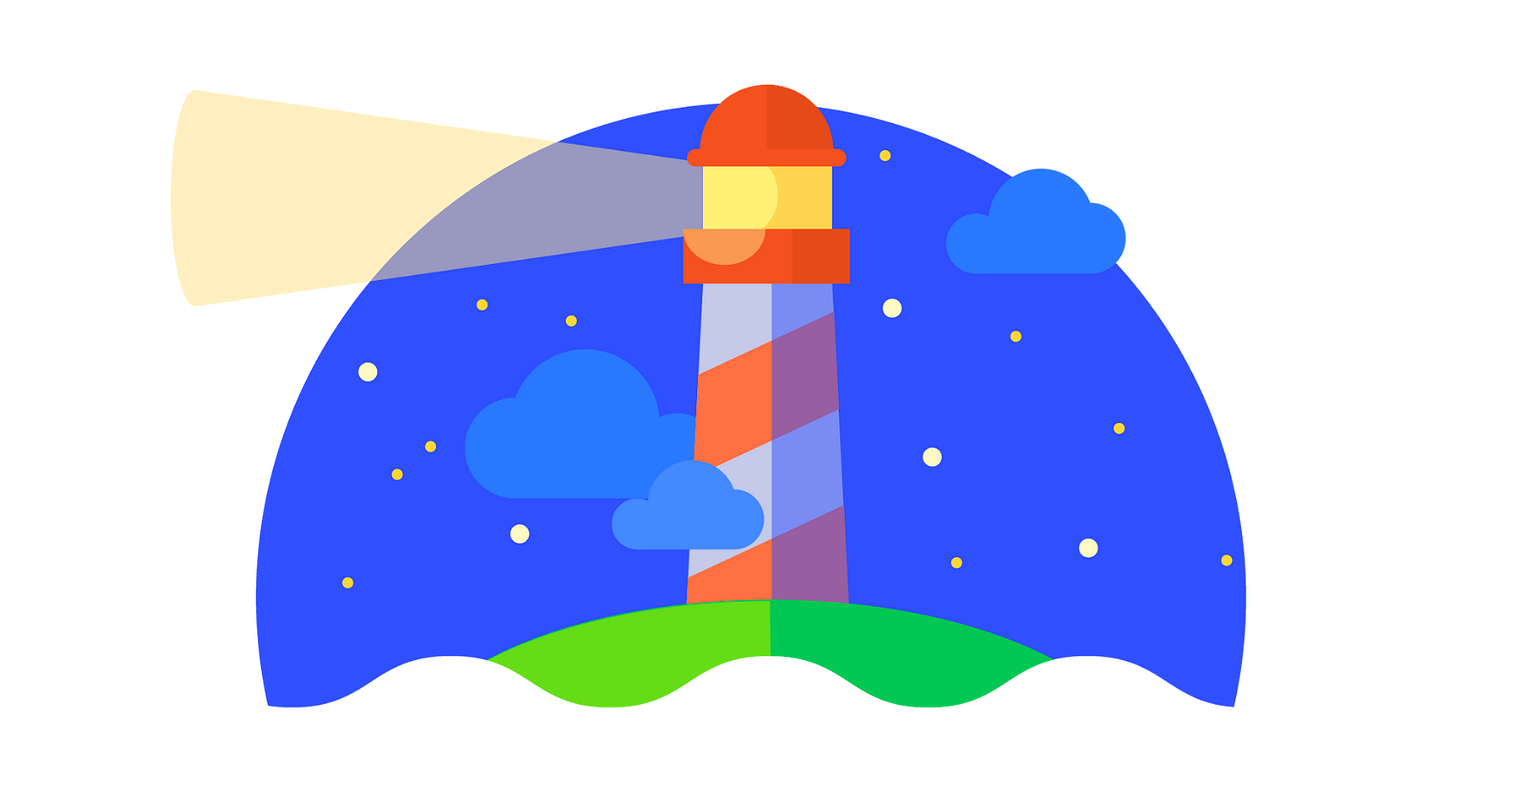 Google: Lighthouse Measures How Fast a Site Loads for Actual Users